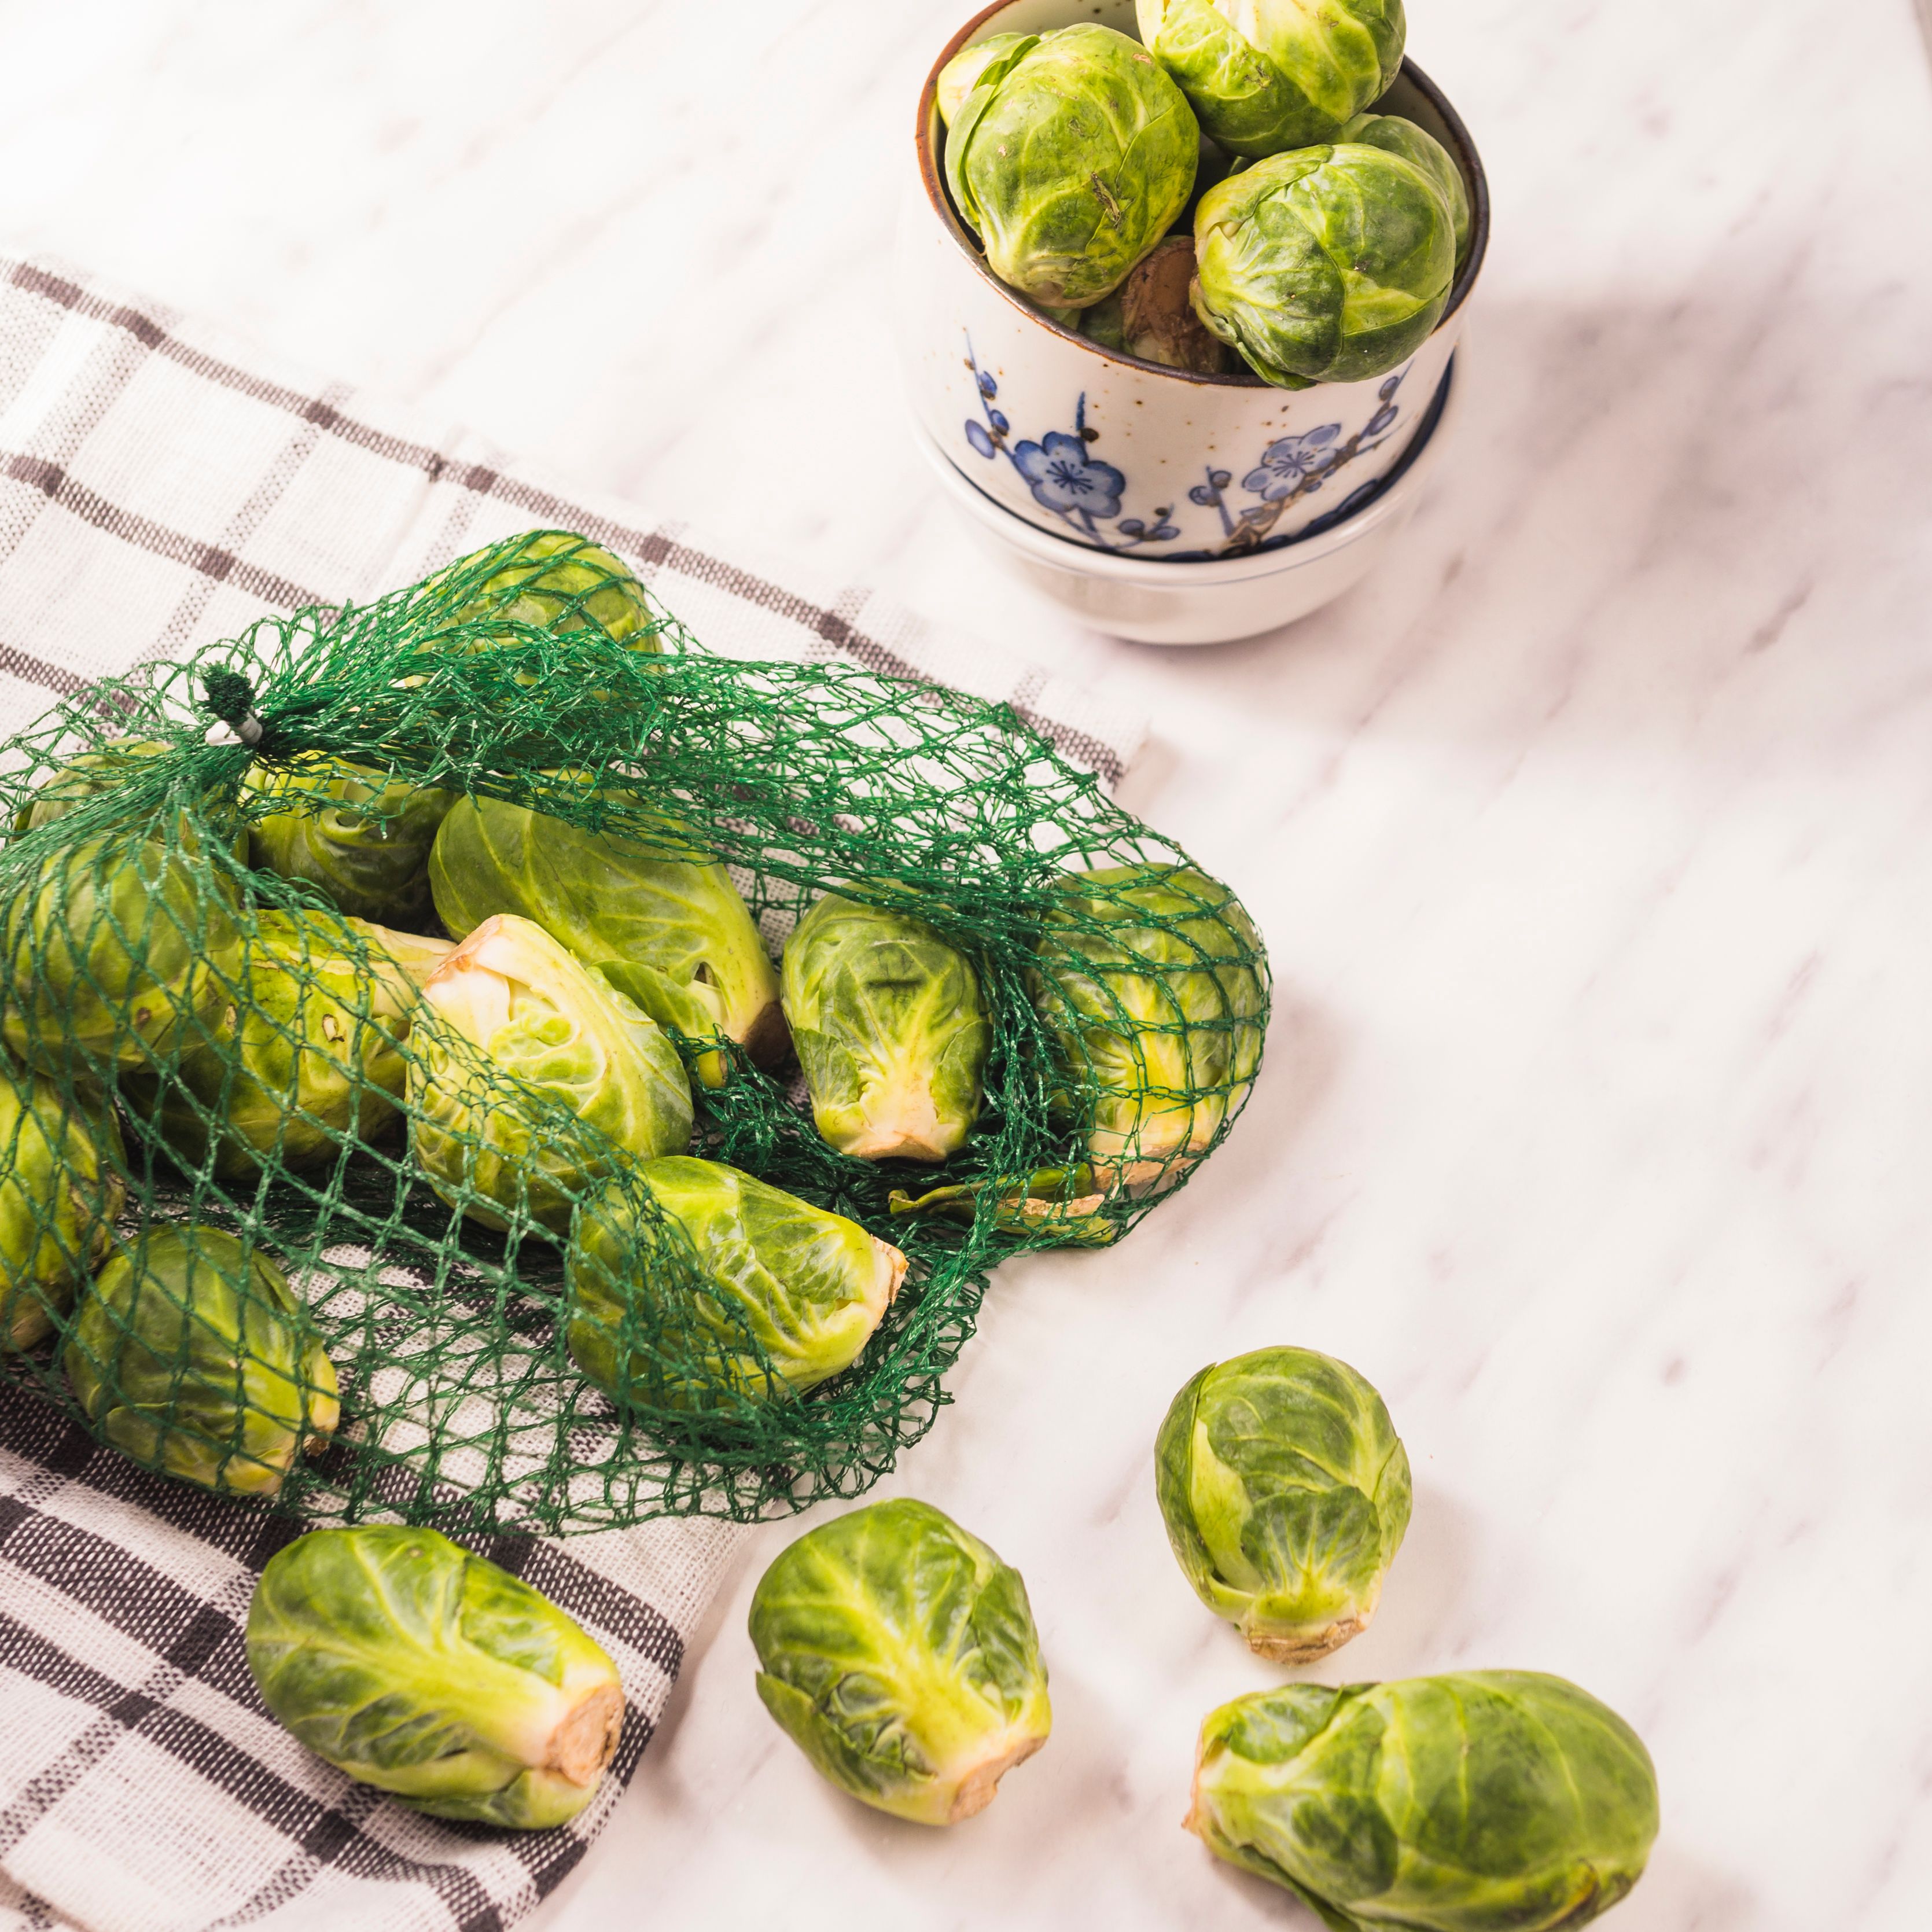 elevated-view-brussels-sprouts-net-chequered-pattern-textile.jpg